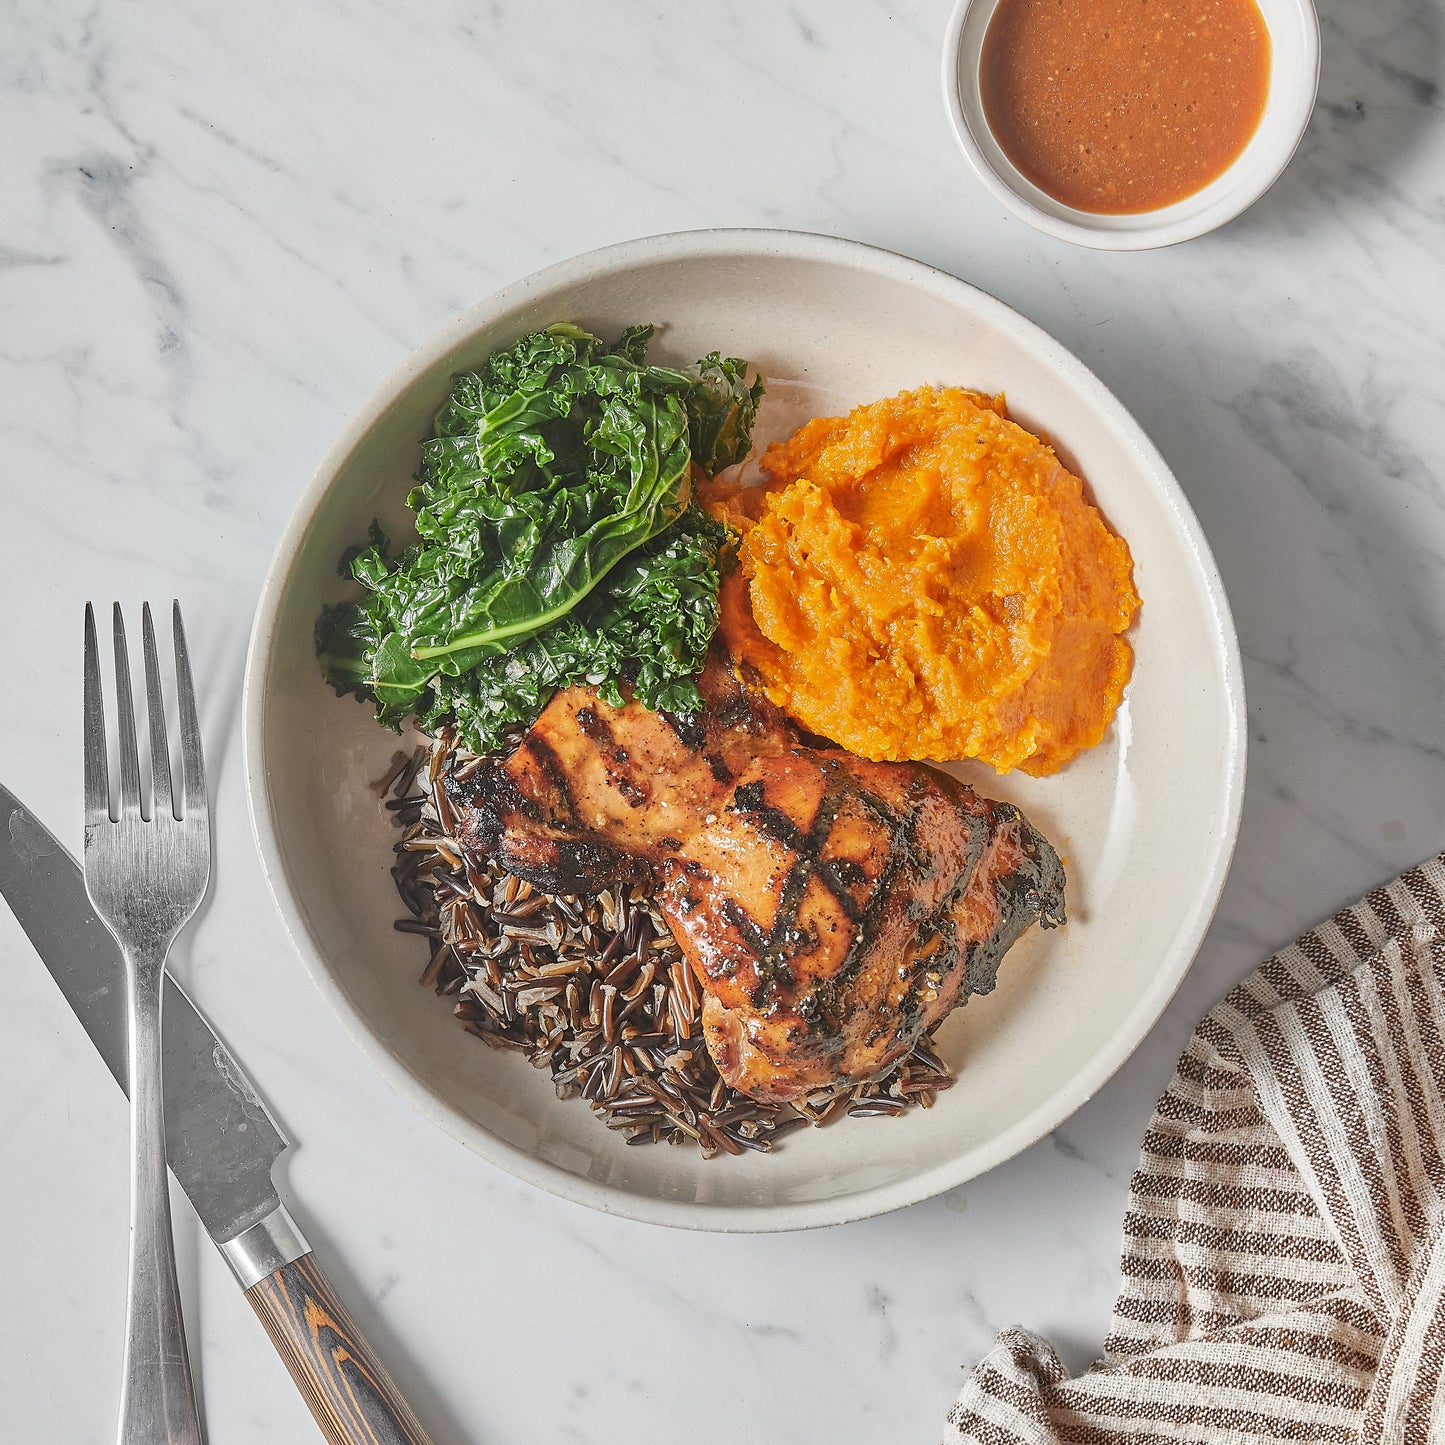 miso-yaki grilled chicken azuluna foods Premium Pasture-Raised ready-to-eat Meals Delivery